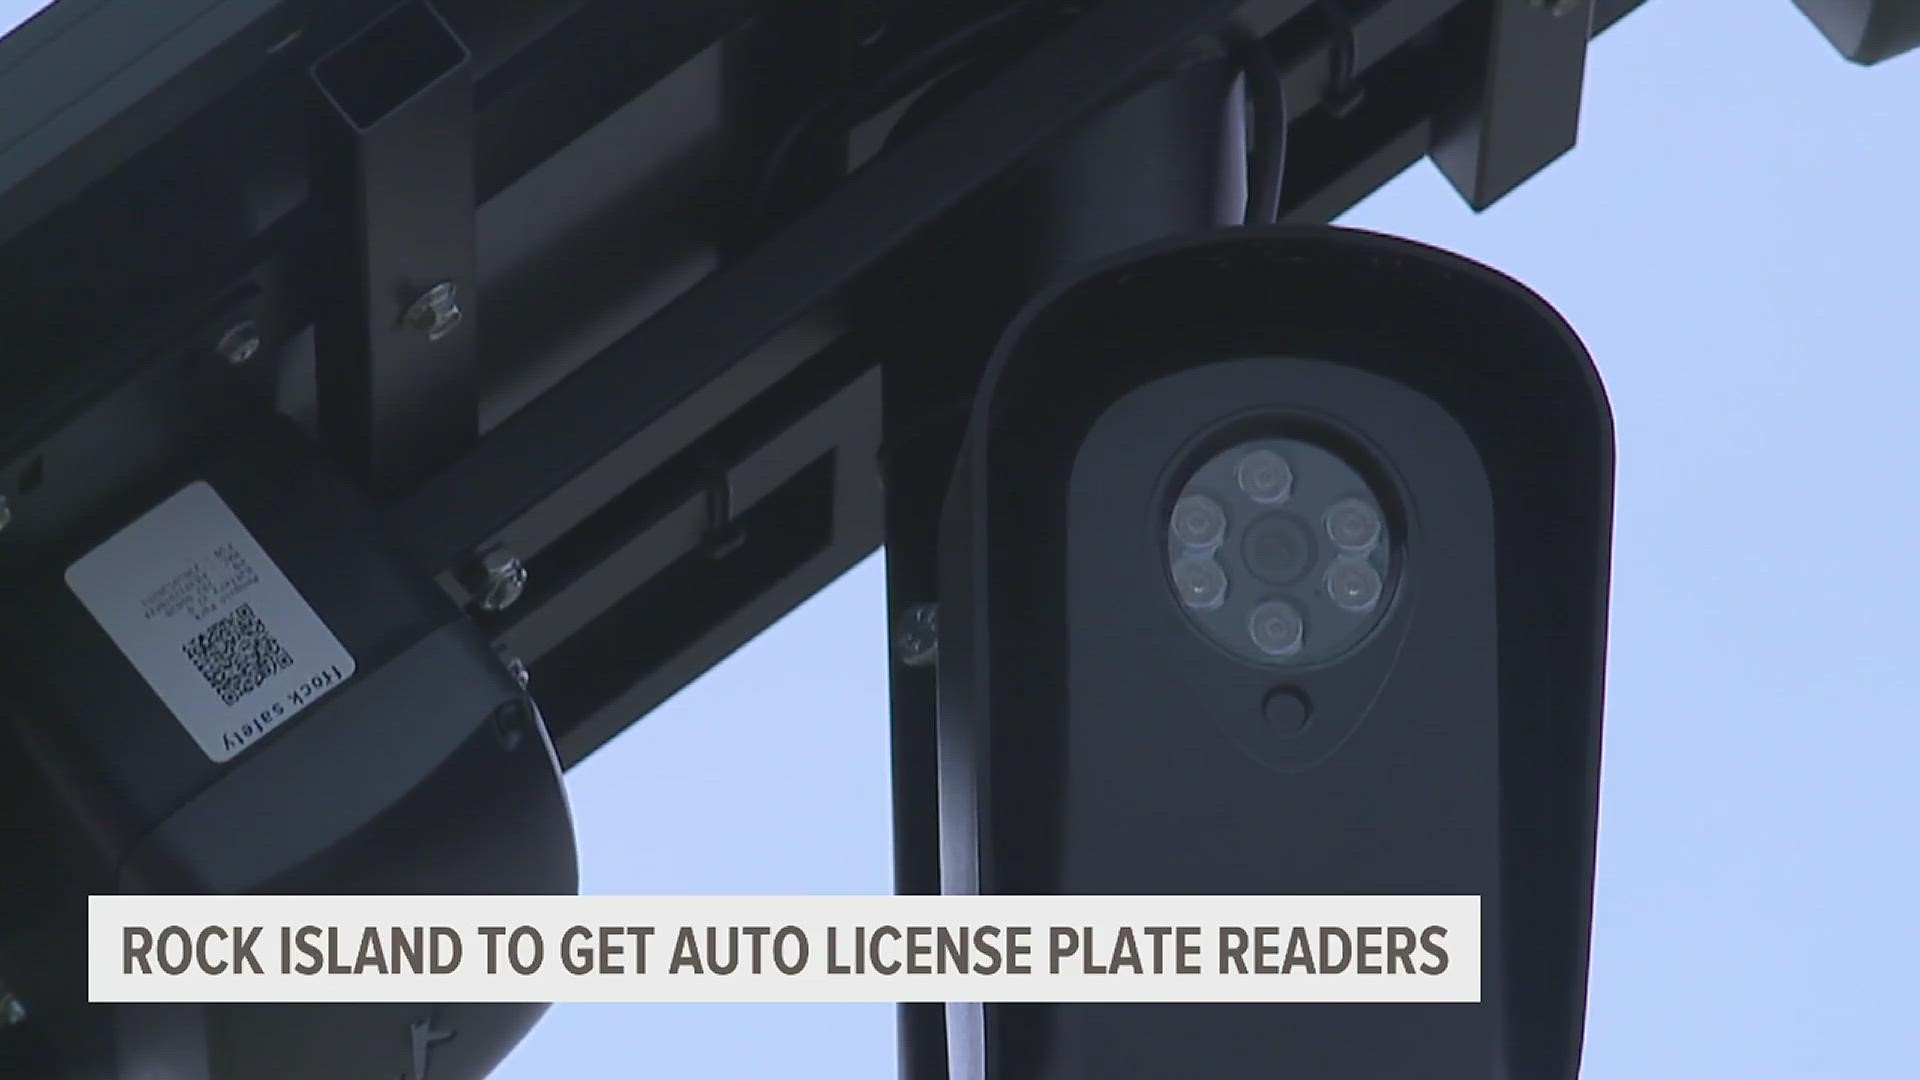 Pending the permits from the Illinois Dept. of Transportation, the city of Rock Island will have an extra set of eyes to help detect vehicles involved in crime.